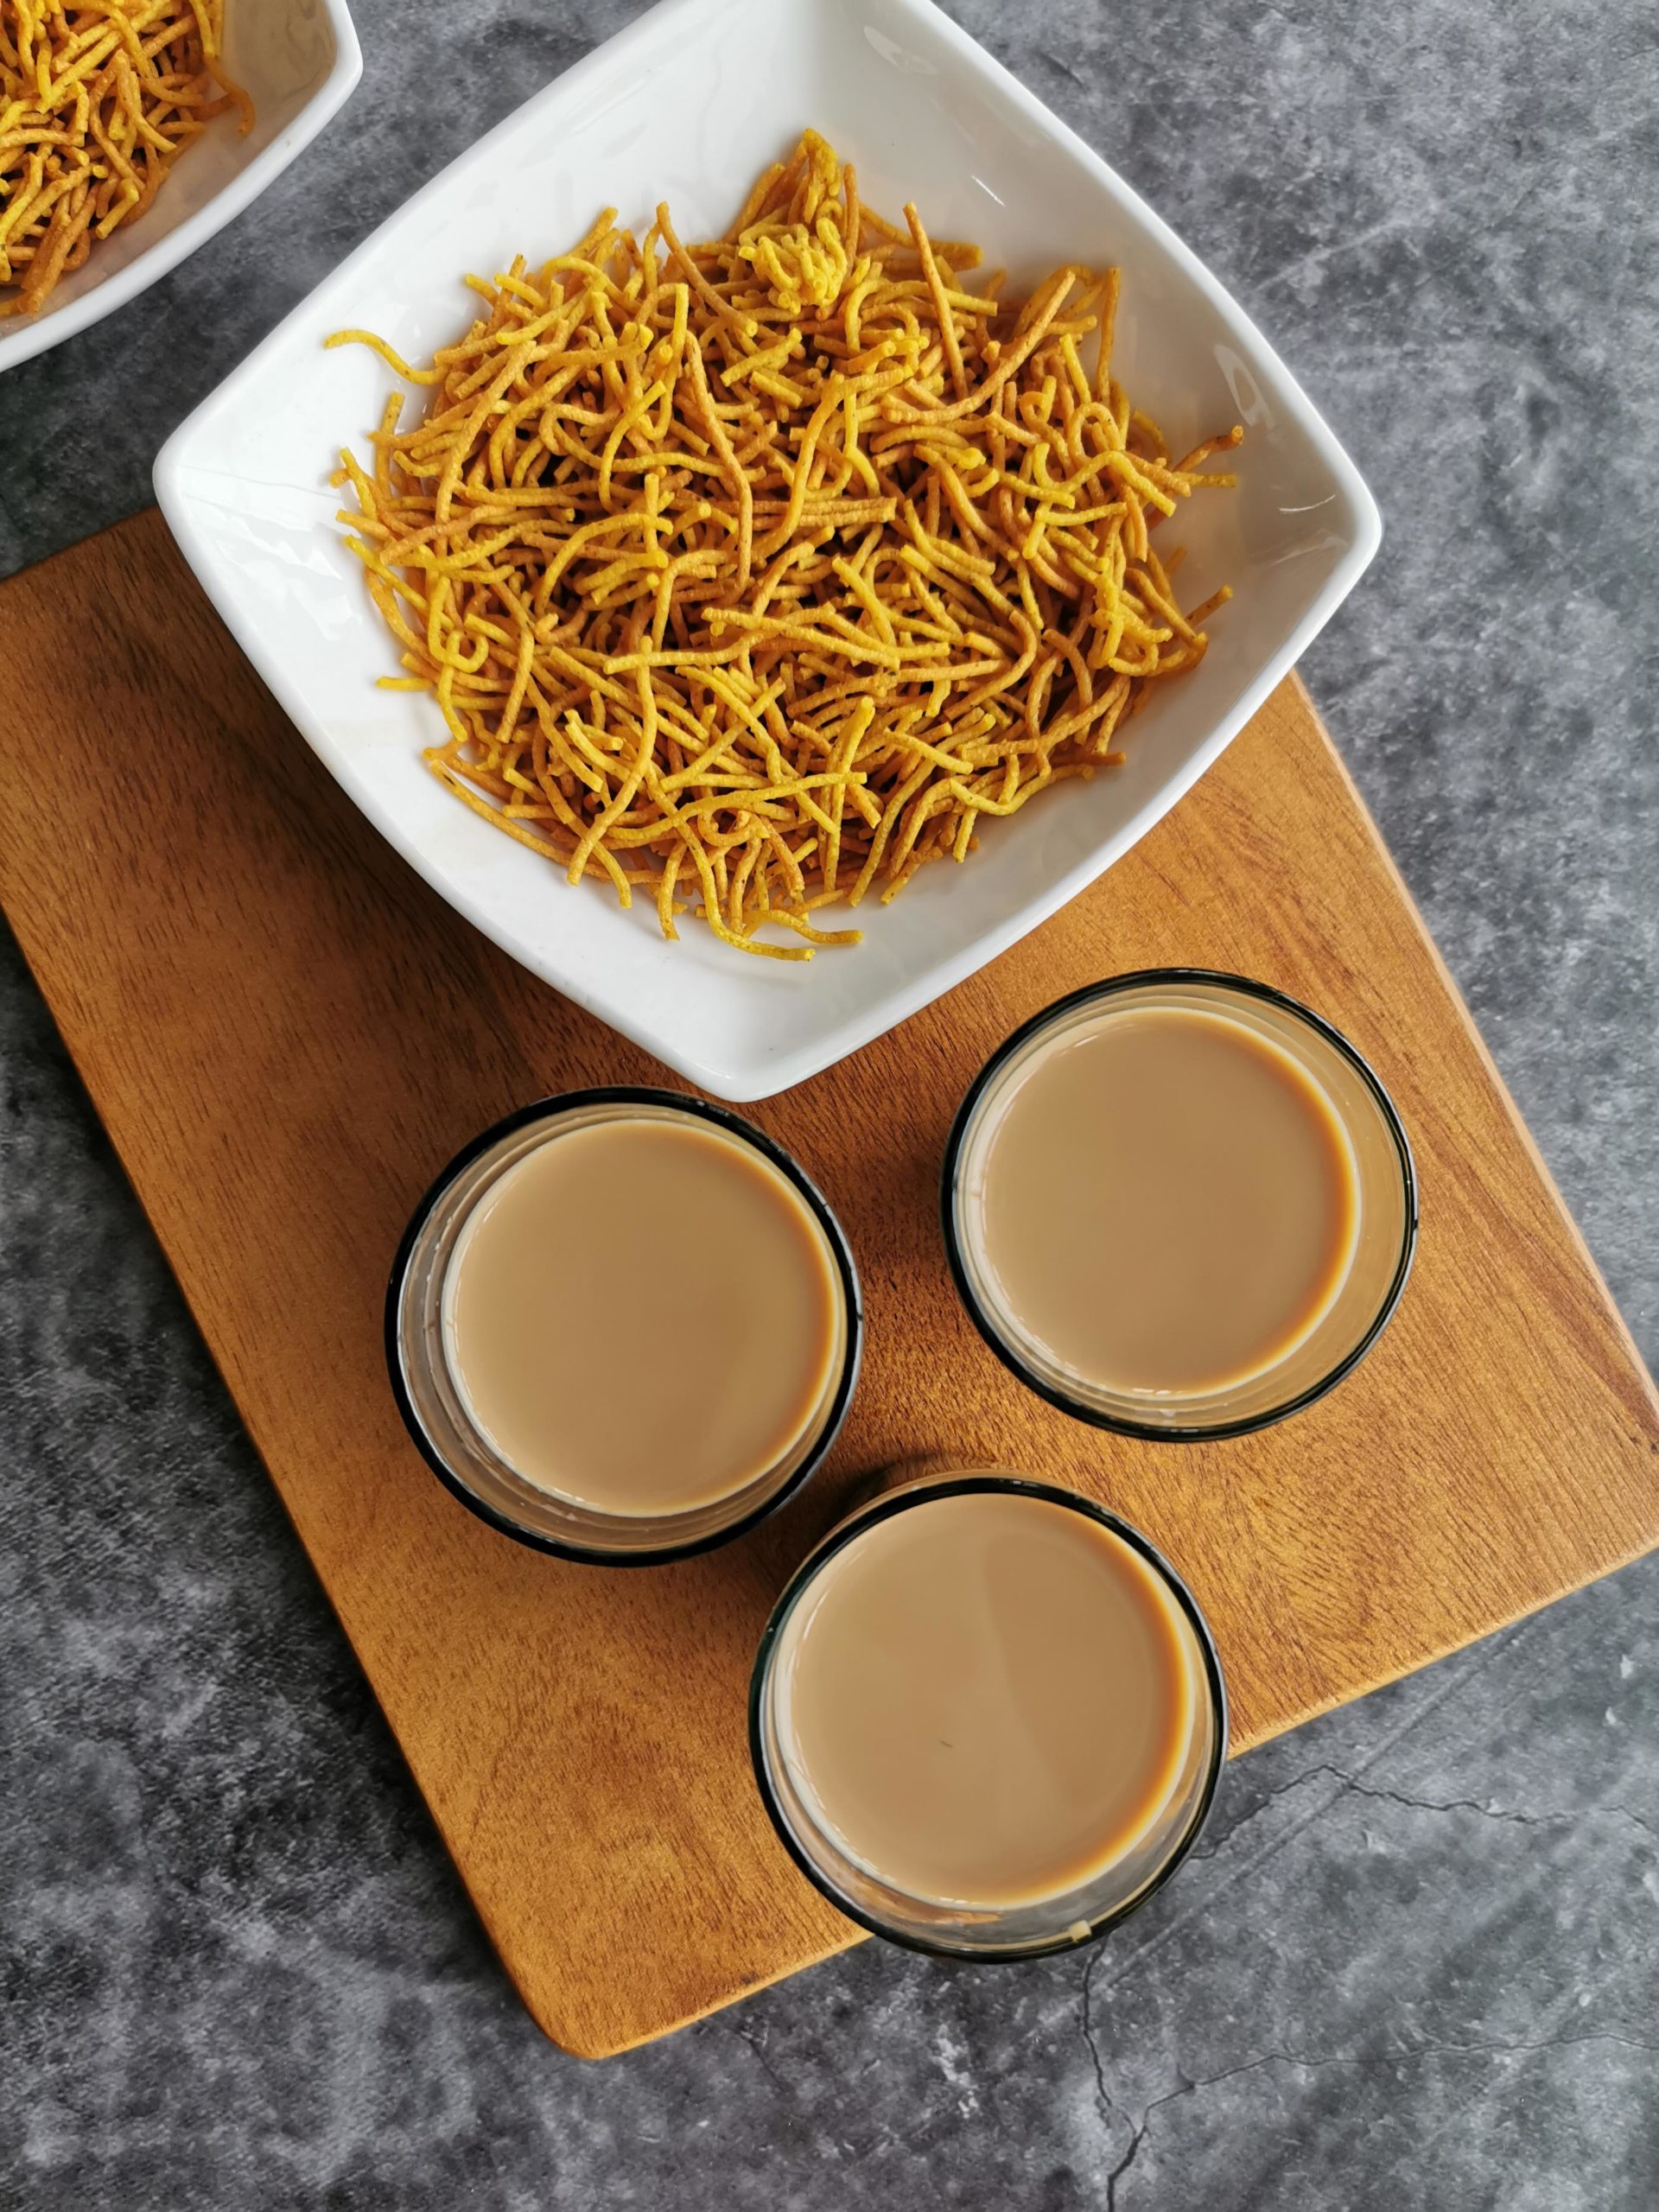 Aloo Bhujia- Potato sev served in white bowls with chai